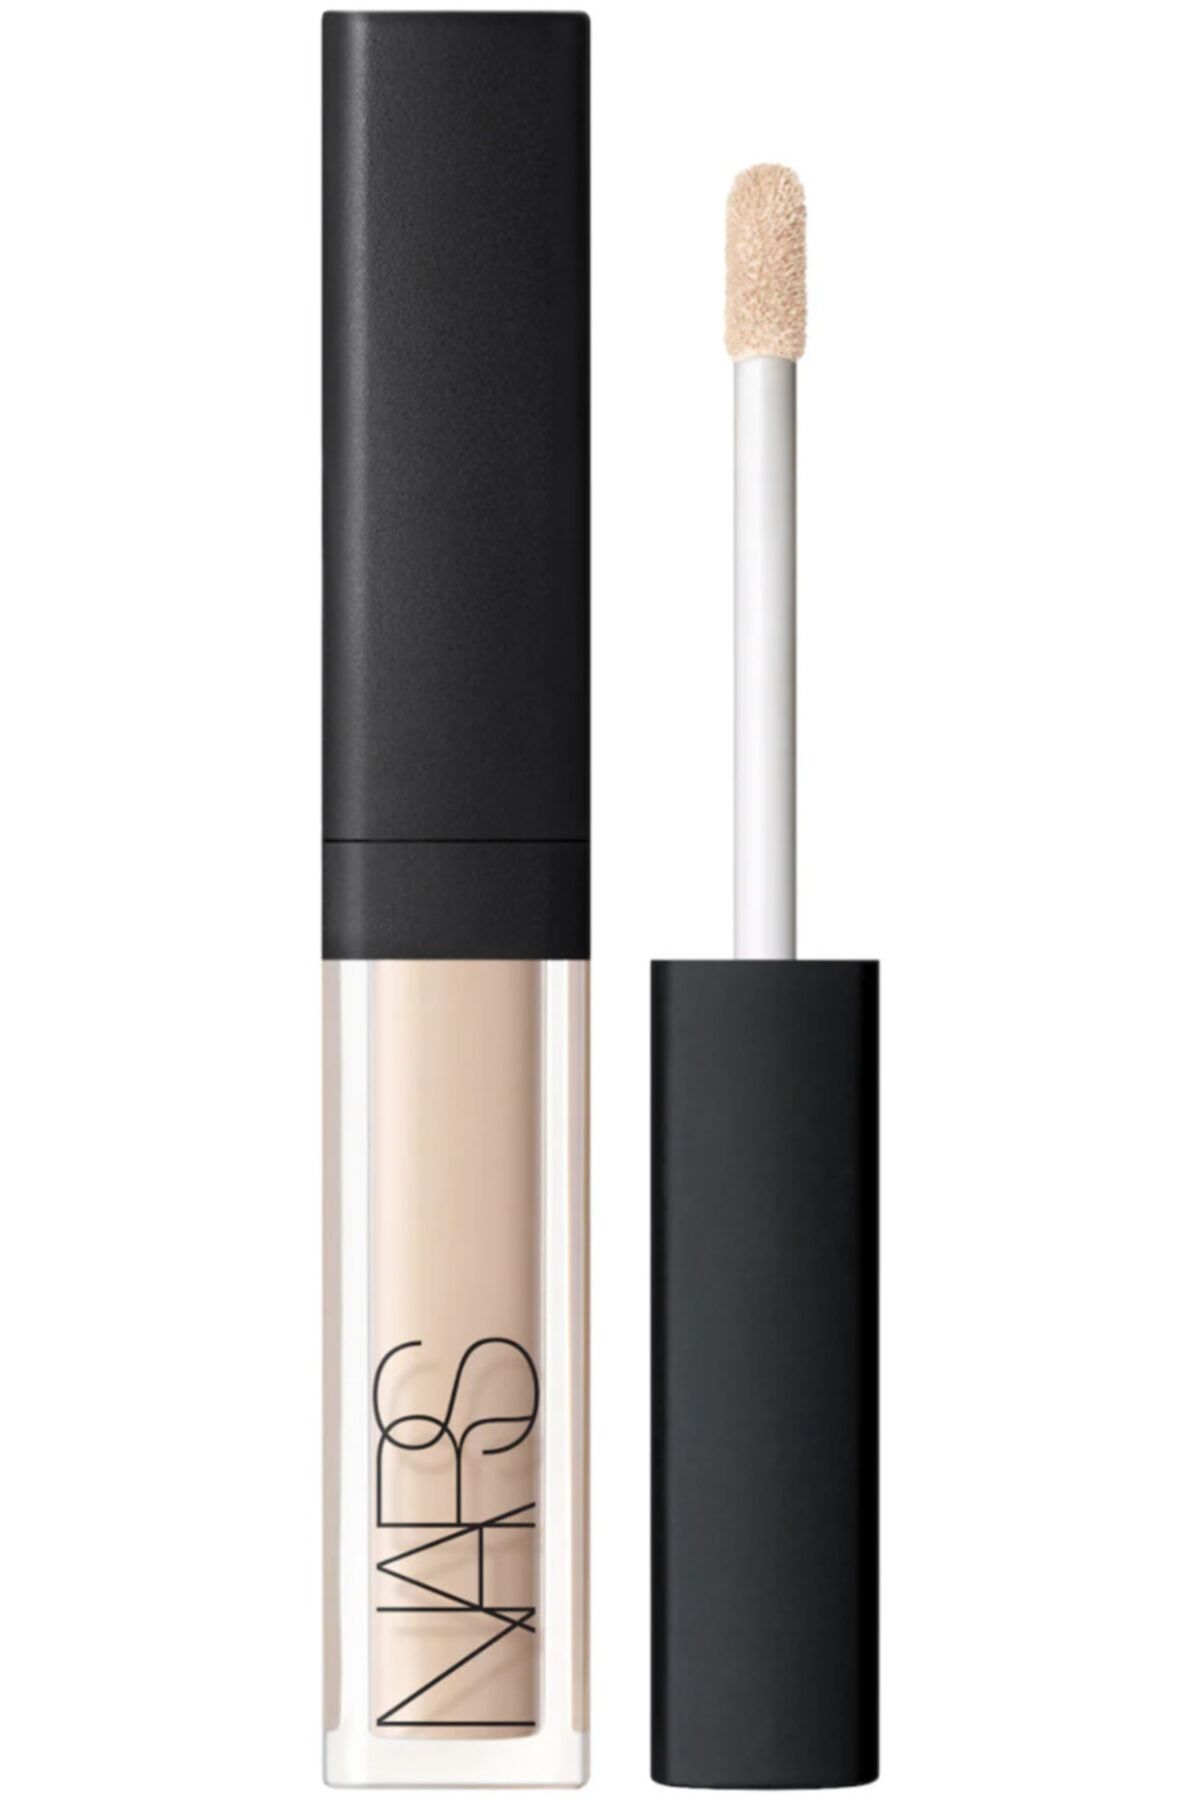 Nars Mini Radiant Creamy Concealer - Chantilly